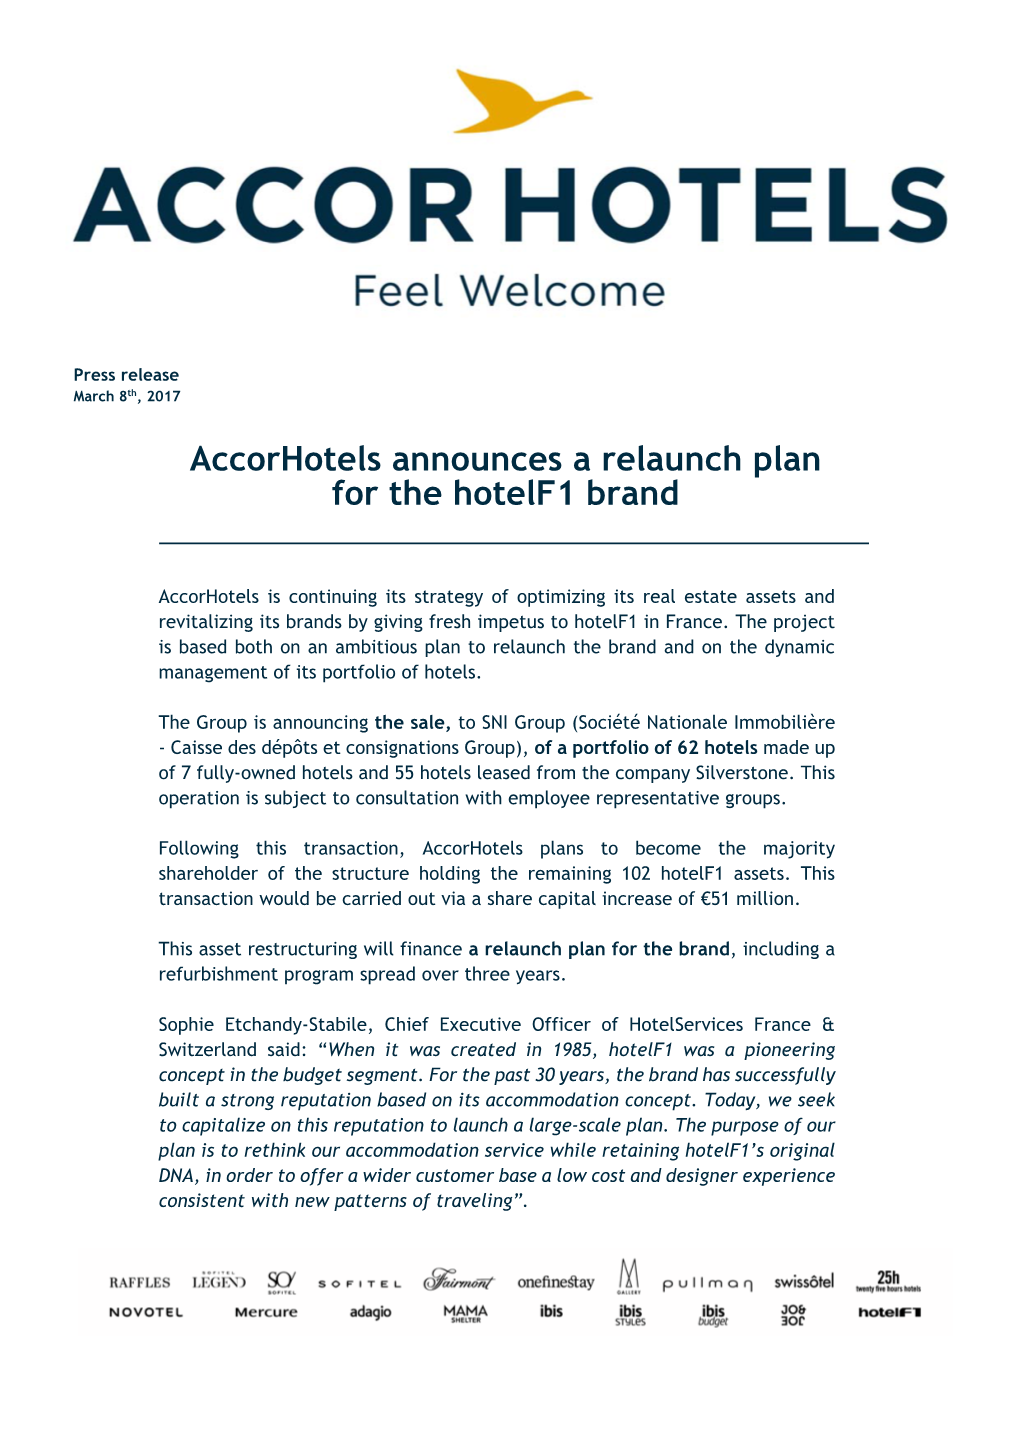 Accorhotels Announces a Relaunch Plan for the Hotelf1 Brand